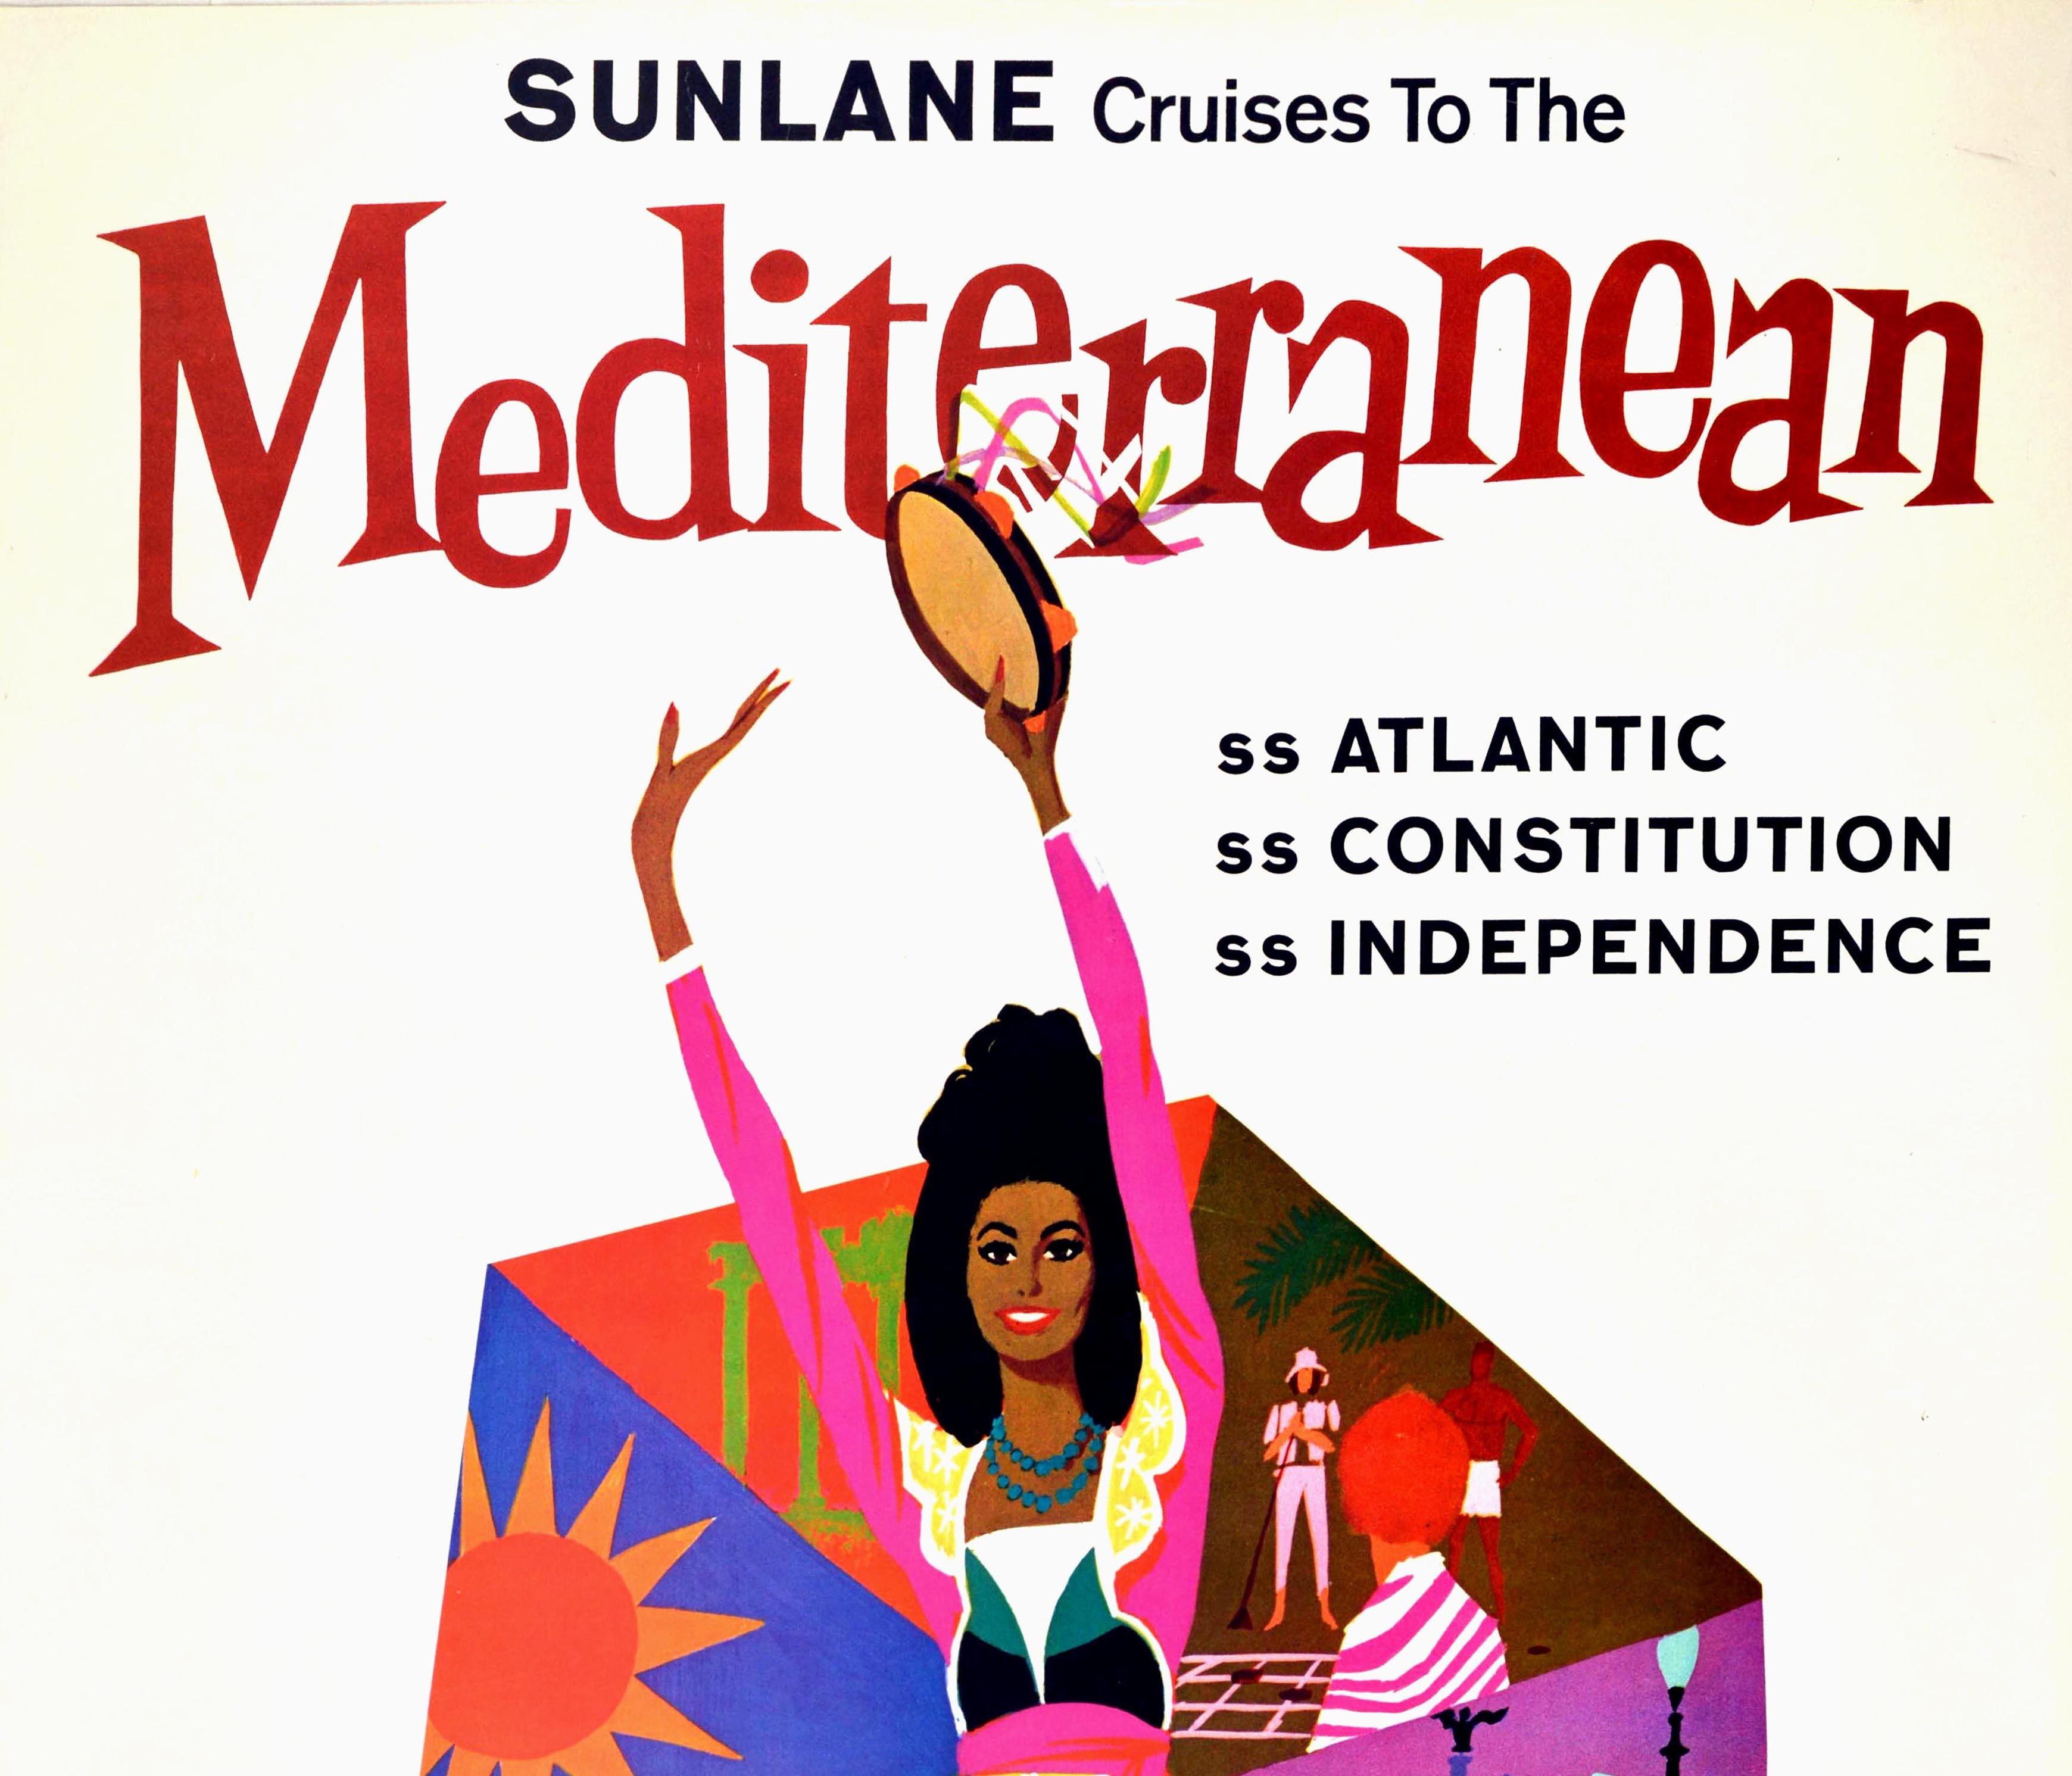 Original vintage travel poster for Sunlane Cruises to the Mediterranean on the SS Atlantic SS Constitution and SS Independence issued by American Export Isbrandtsen Lines featuring fun and colorful artwork of a lady dancing and playing music on a